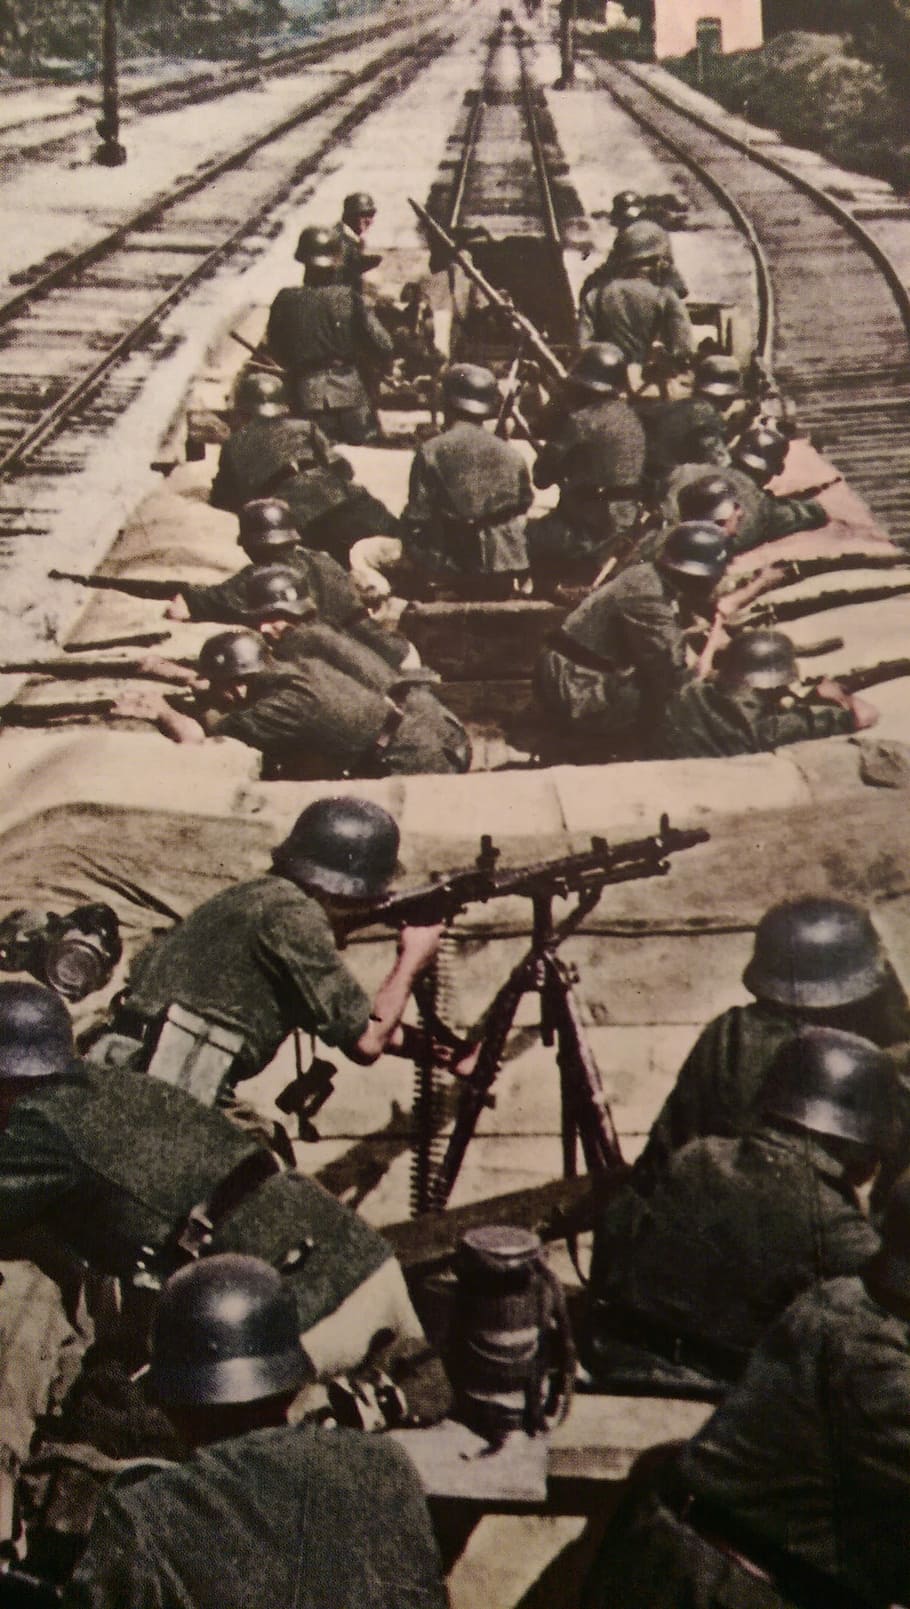 soldiers holding rifles, Ww2, War, Guns, Outdoor, History, military